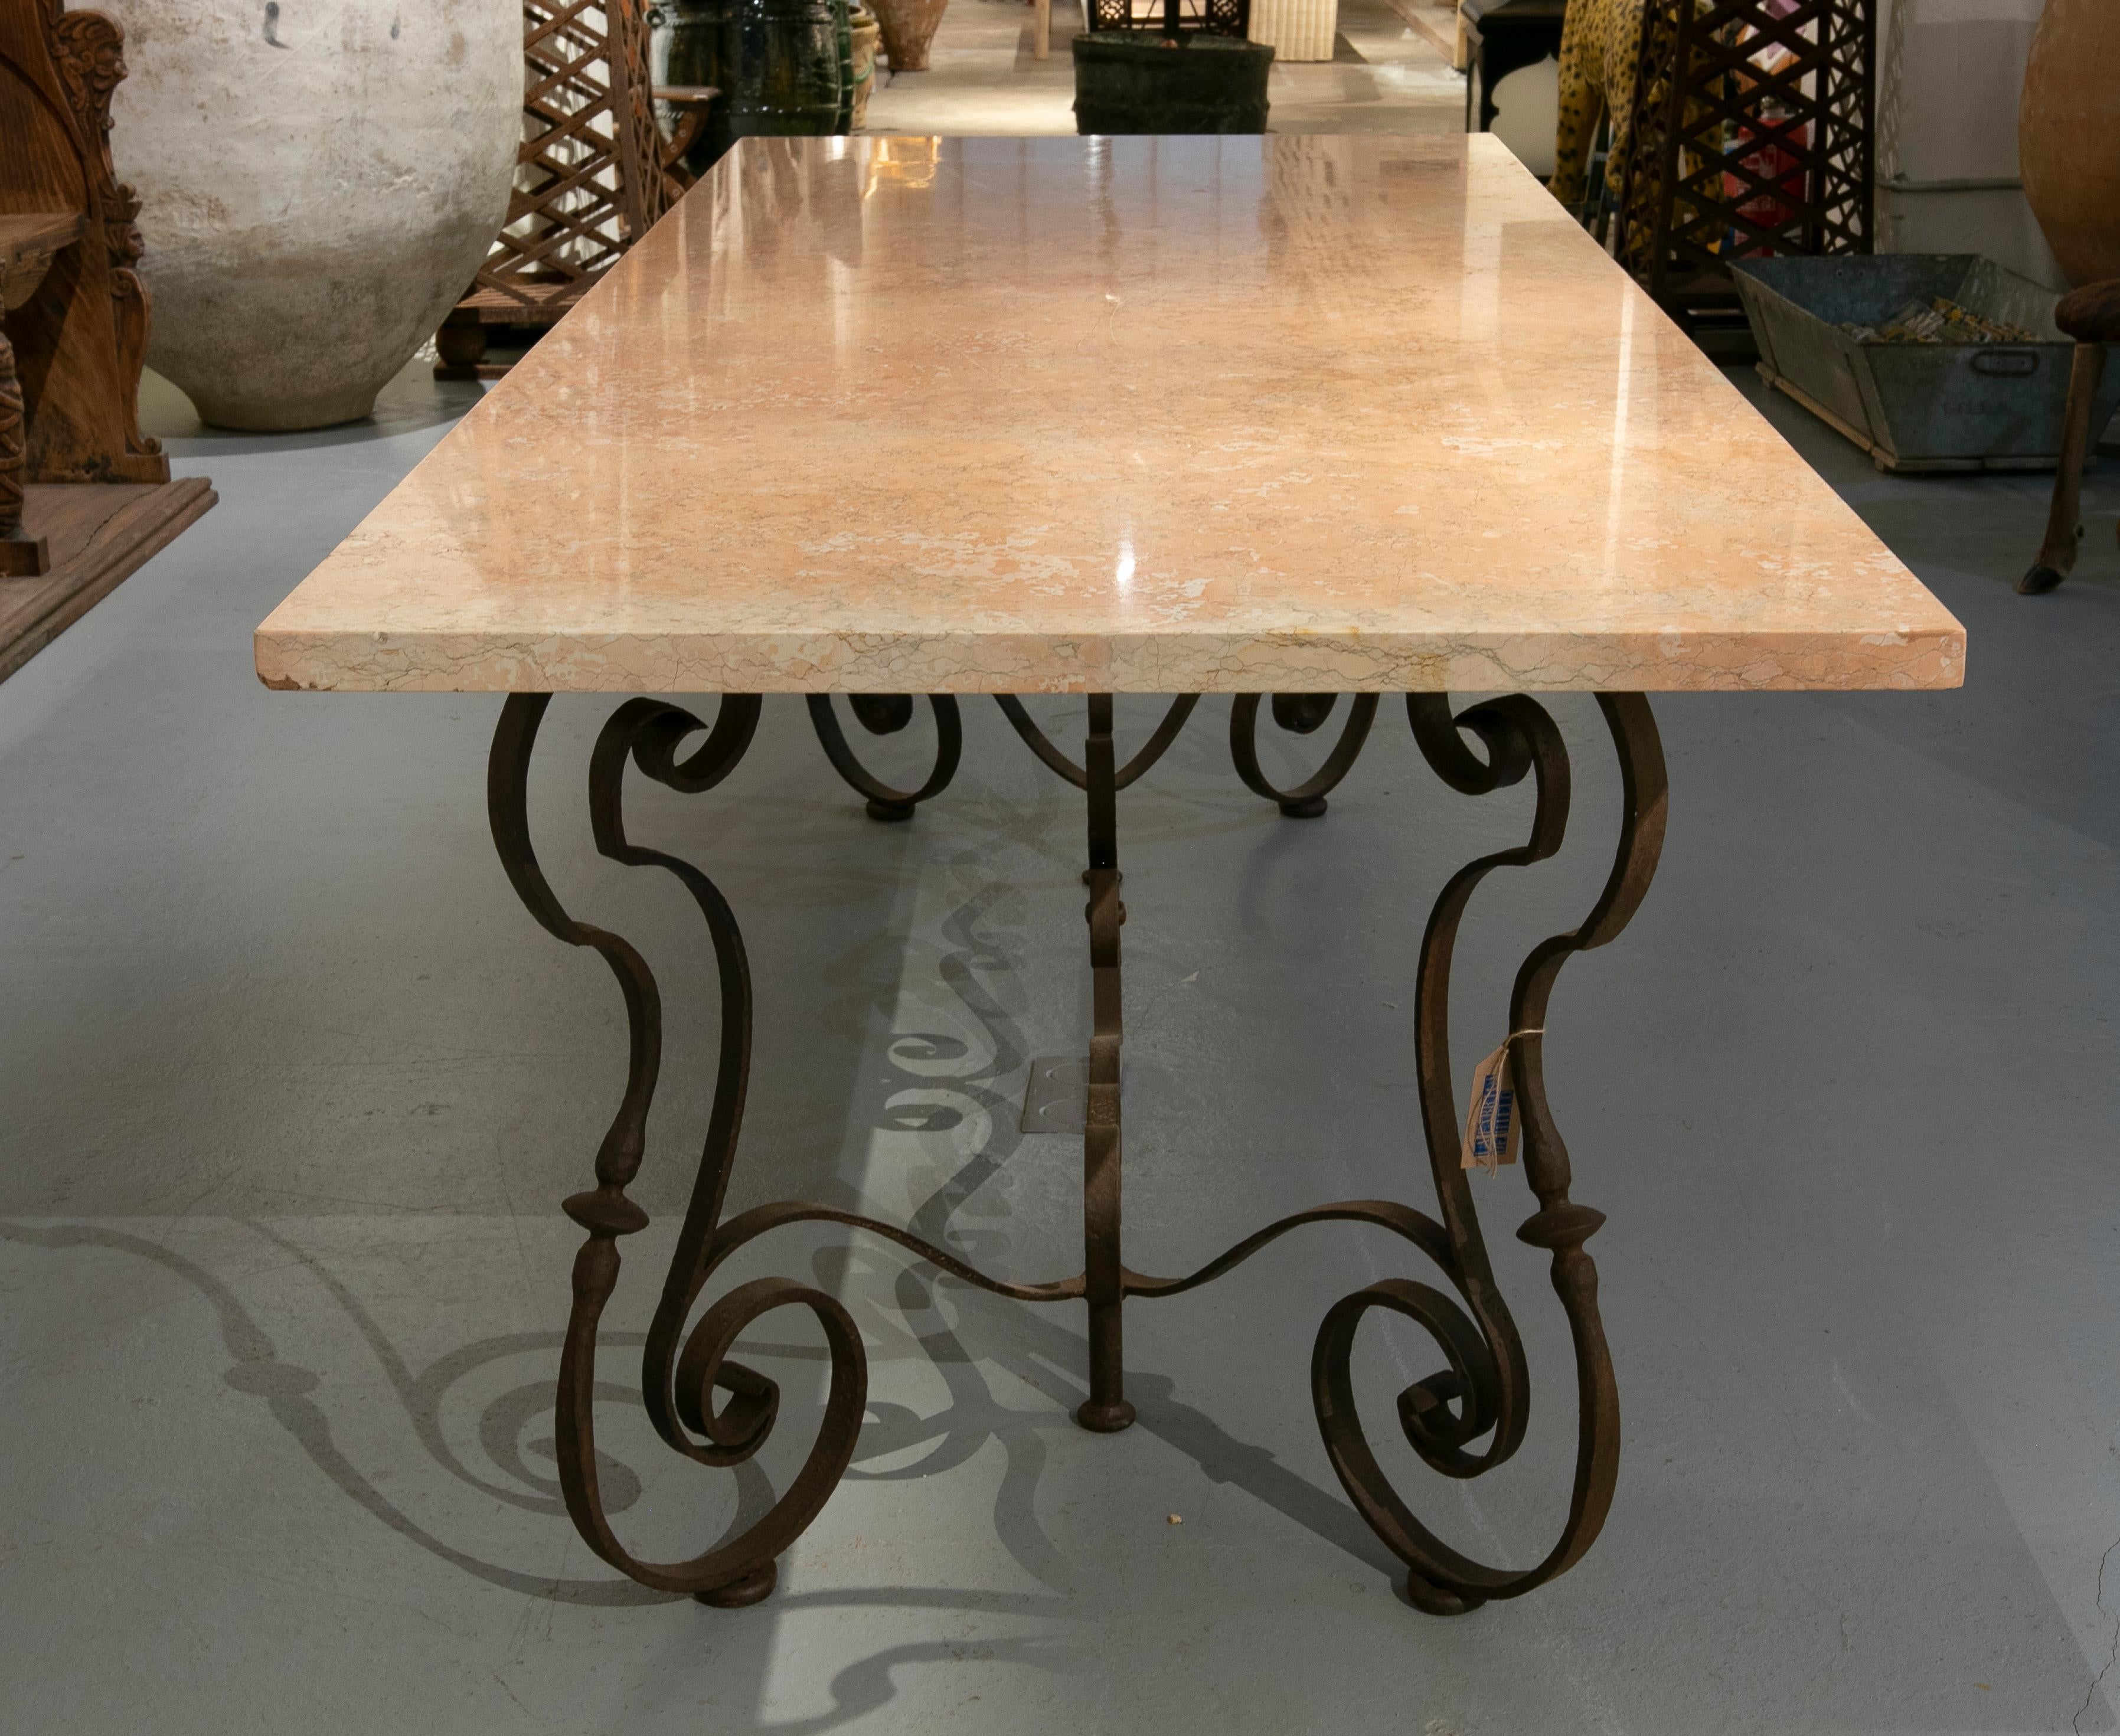 20th Century Italian Table with Iron Base and Rosseta Marble Top from Verona